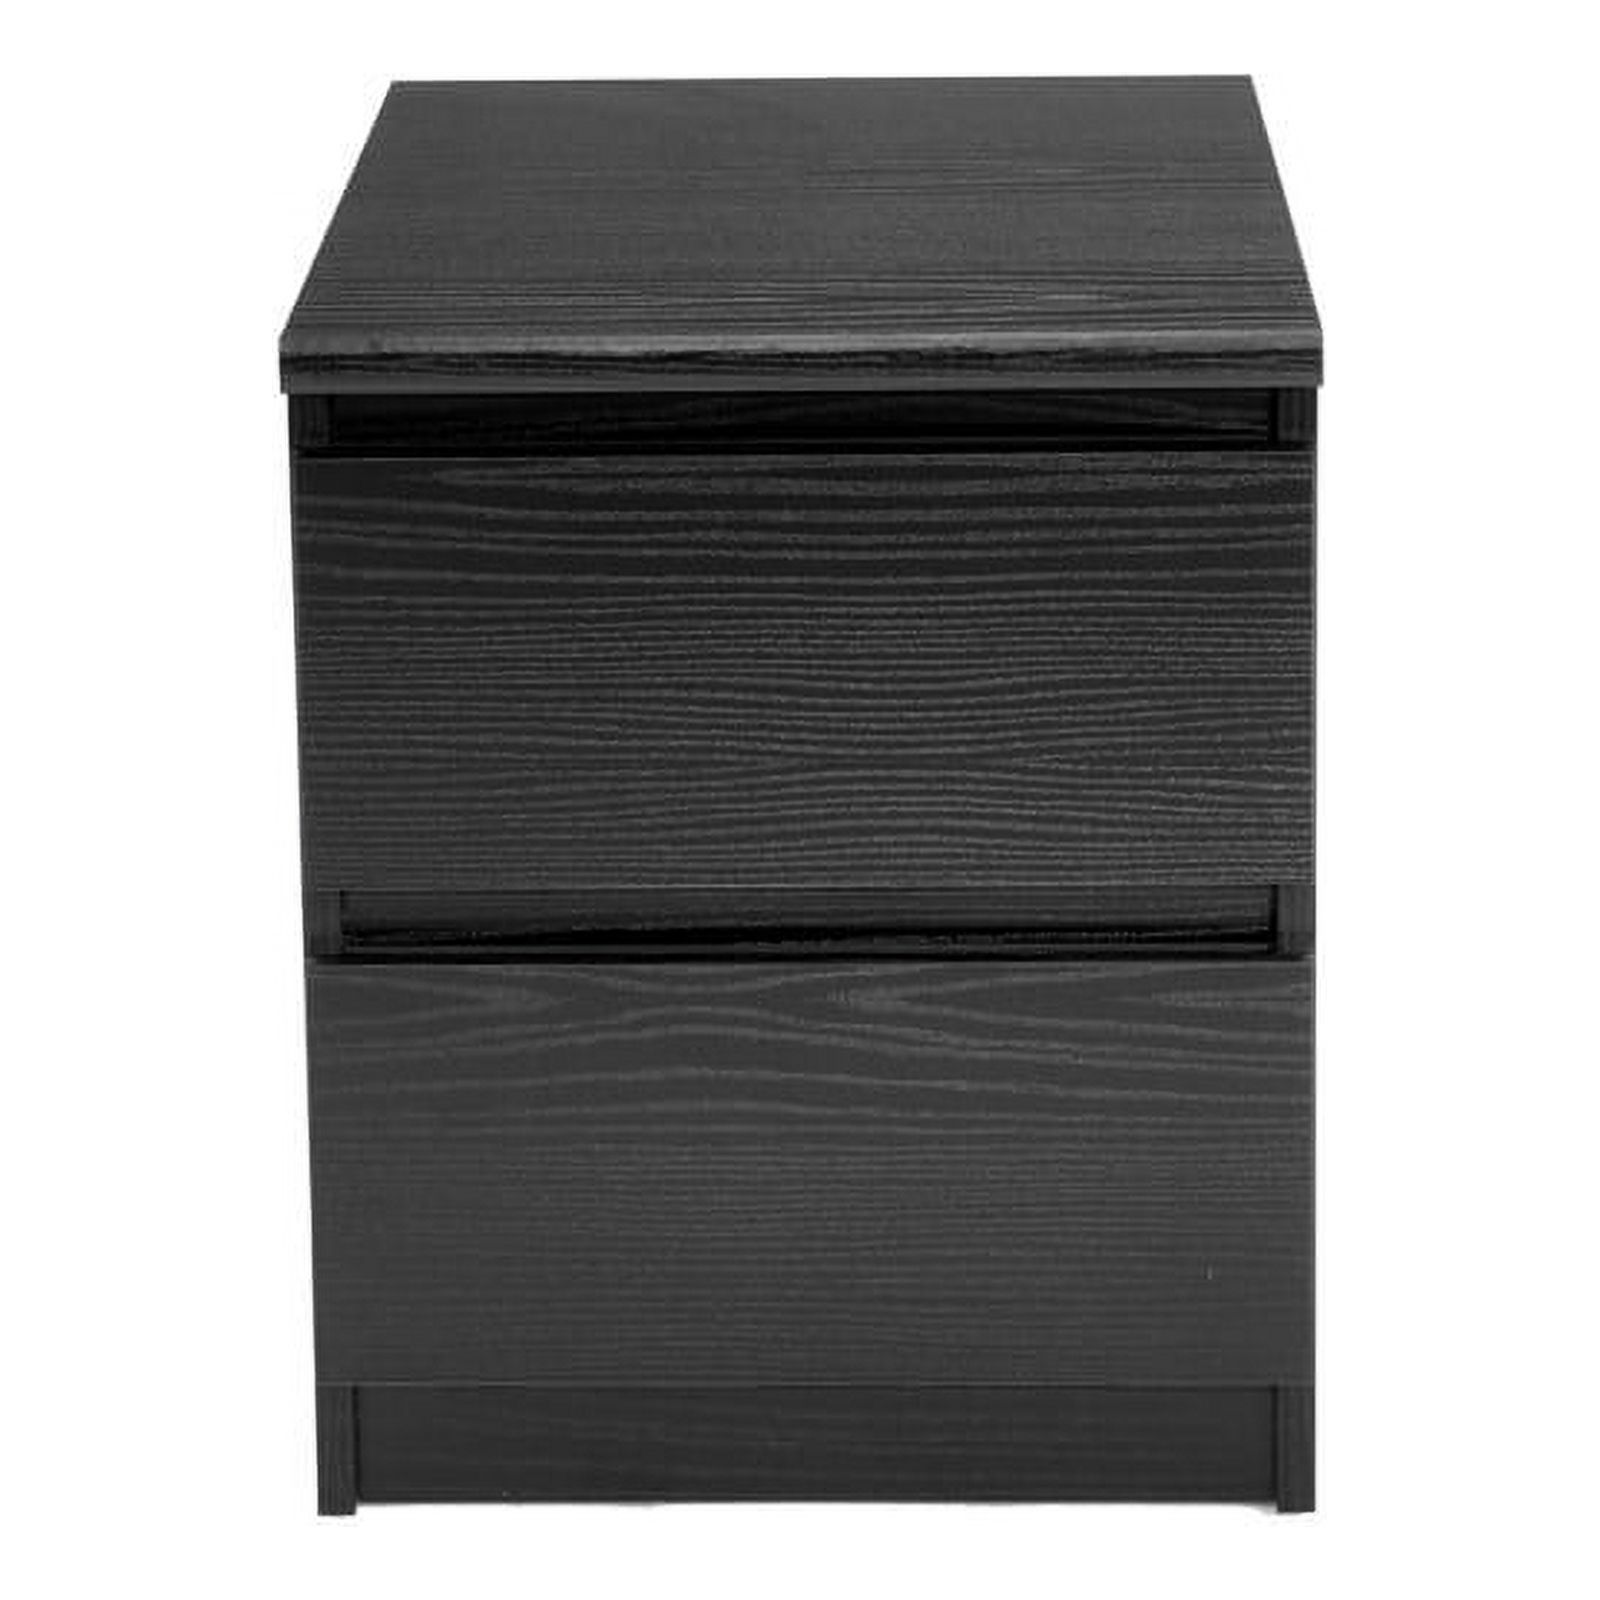 Home Square 2 Drawer Night Stands in Black Woodgrain (Set of 2) - image 4 of 4